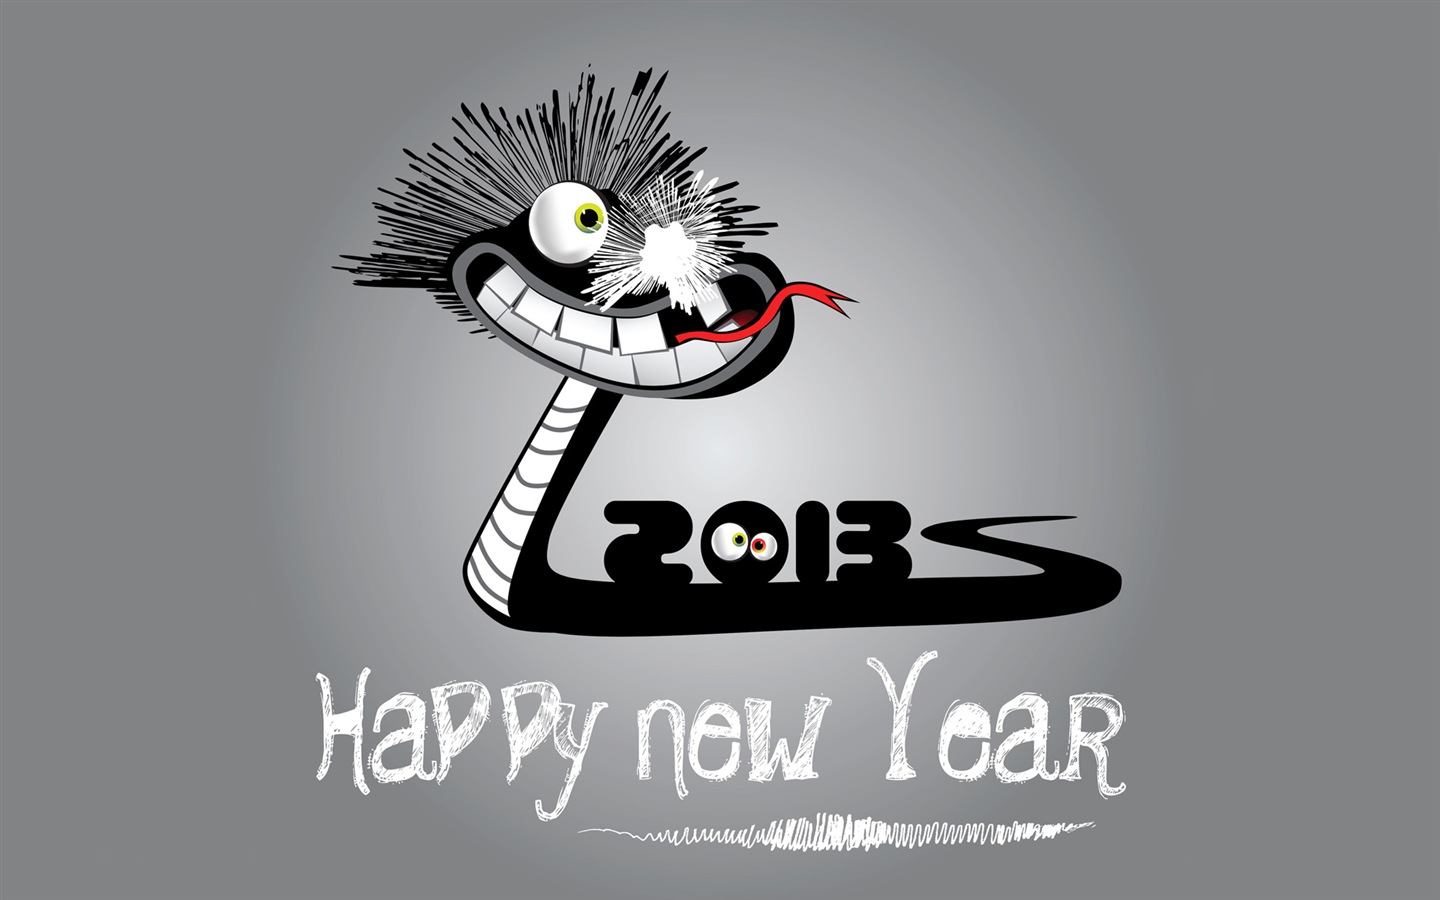 2013 Happy New Year HD wallpapers #19 - 1440x900